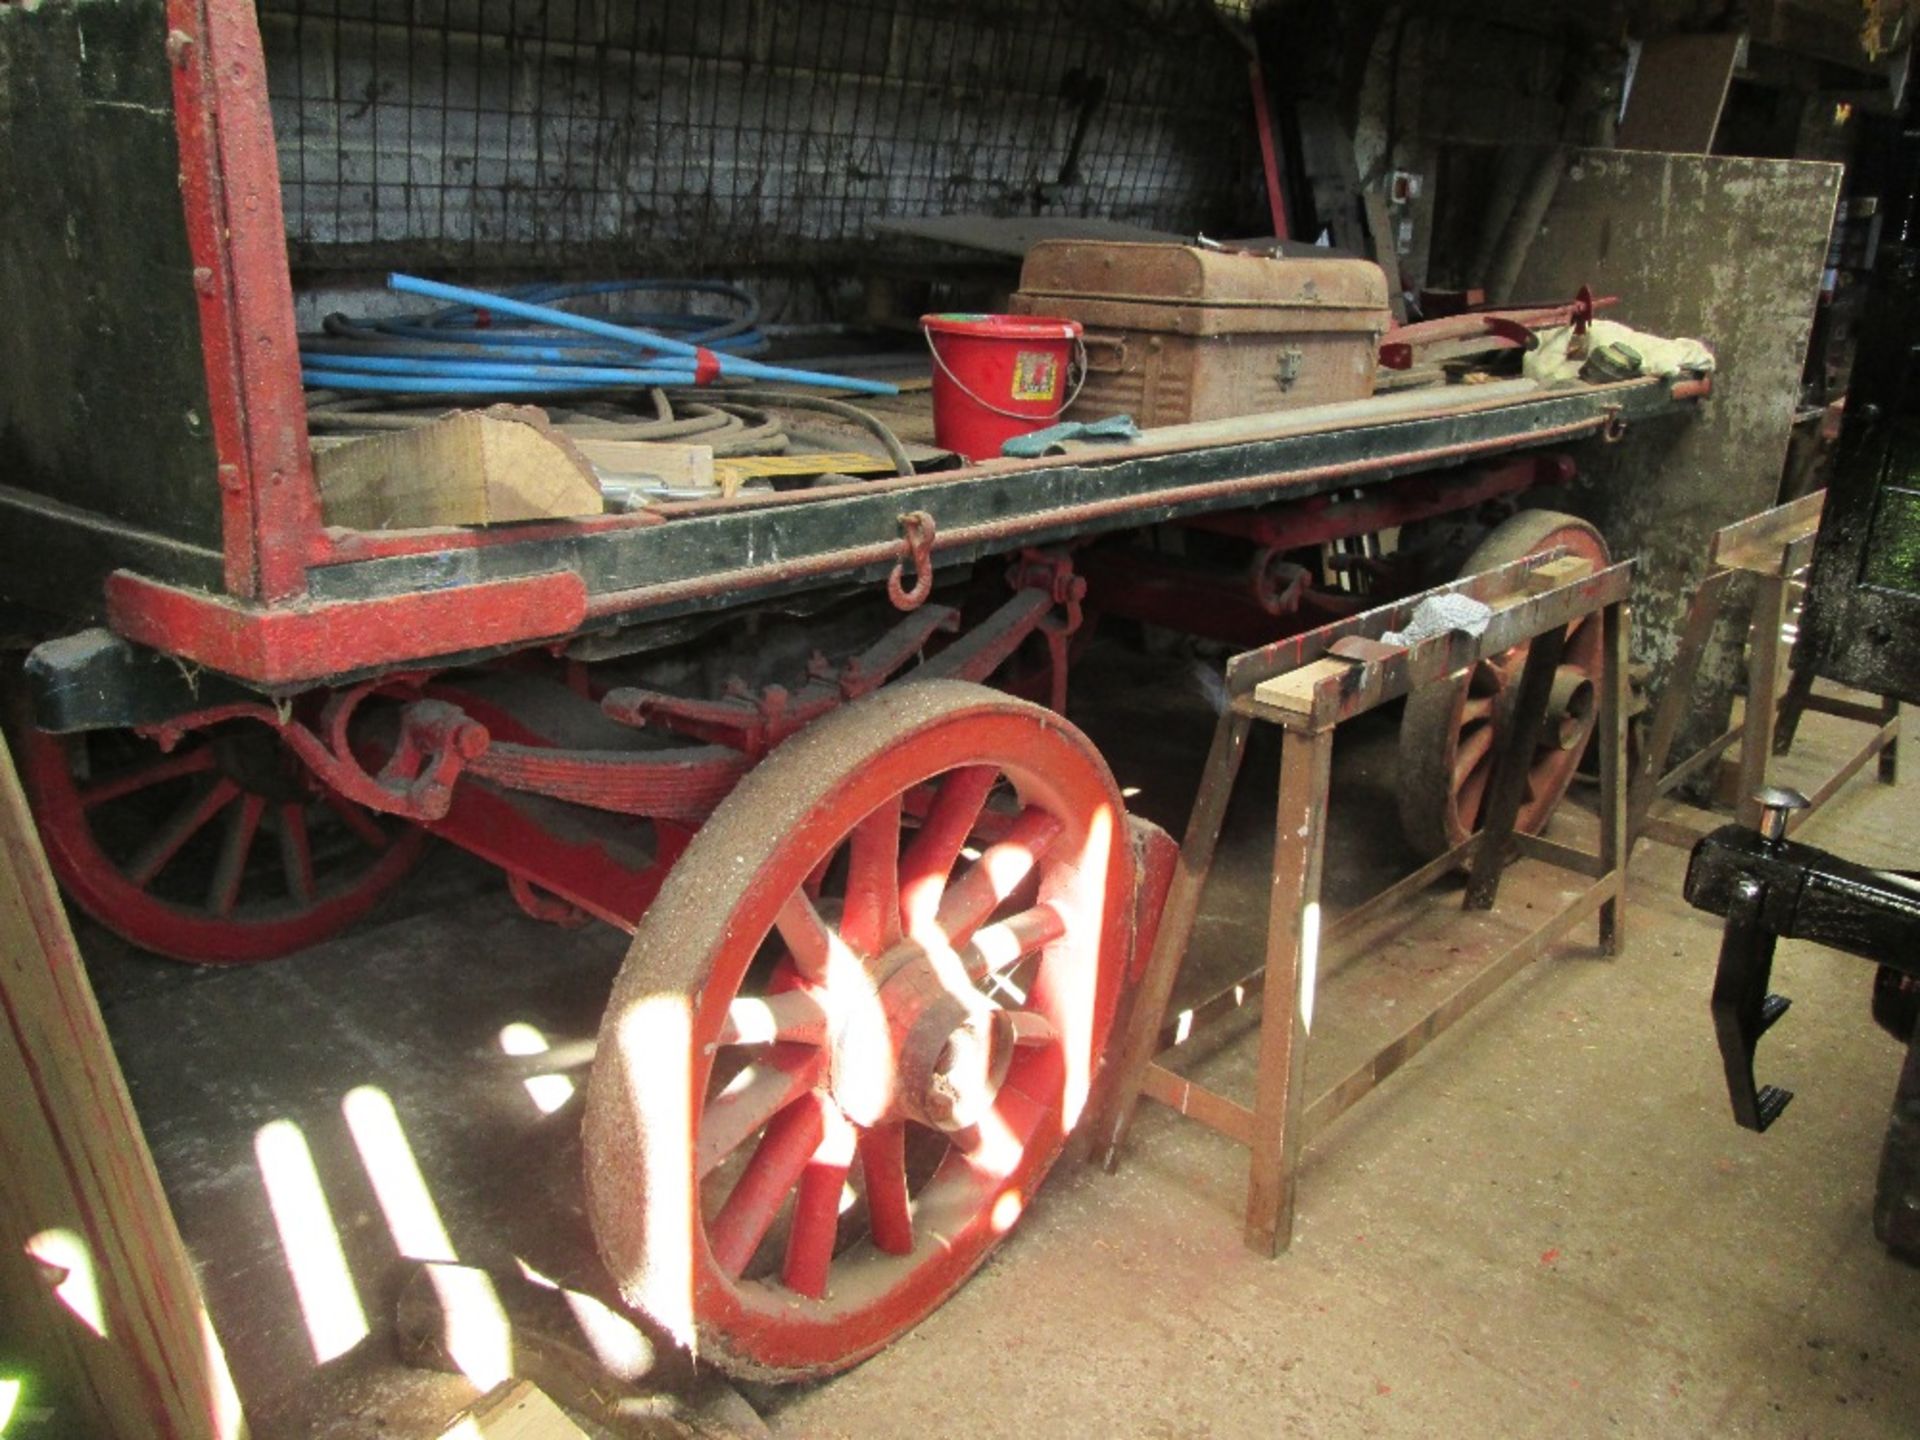 Flat Bed Trolley, painted black with a red undercarriage. Measures 12ft long x 6ft wide